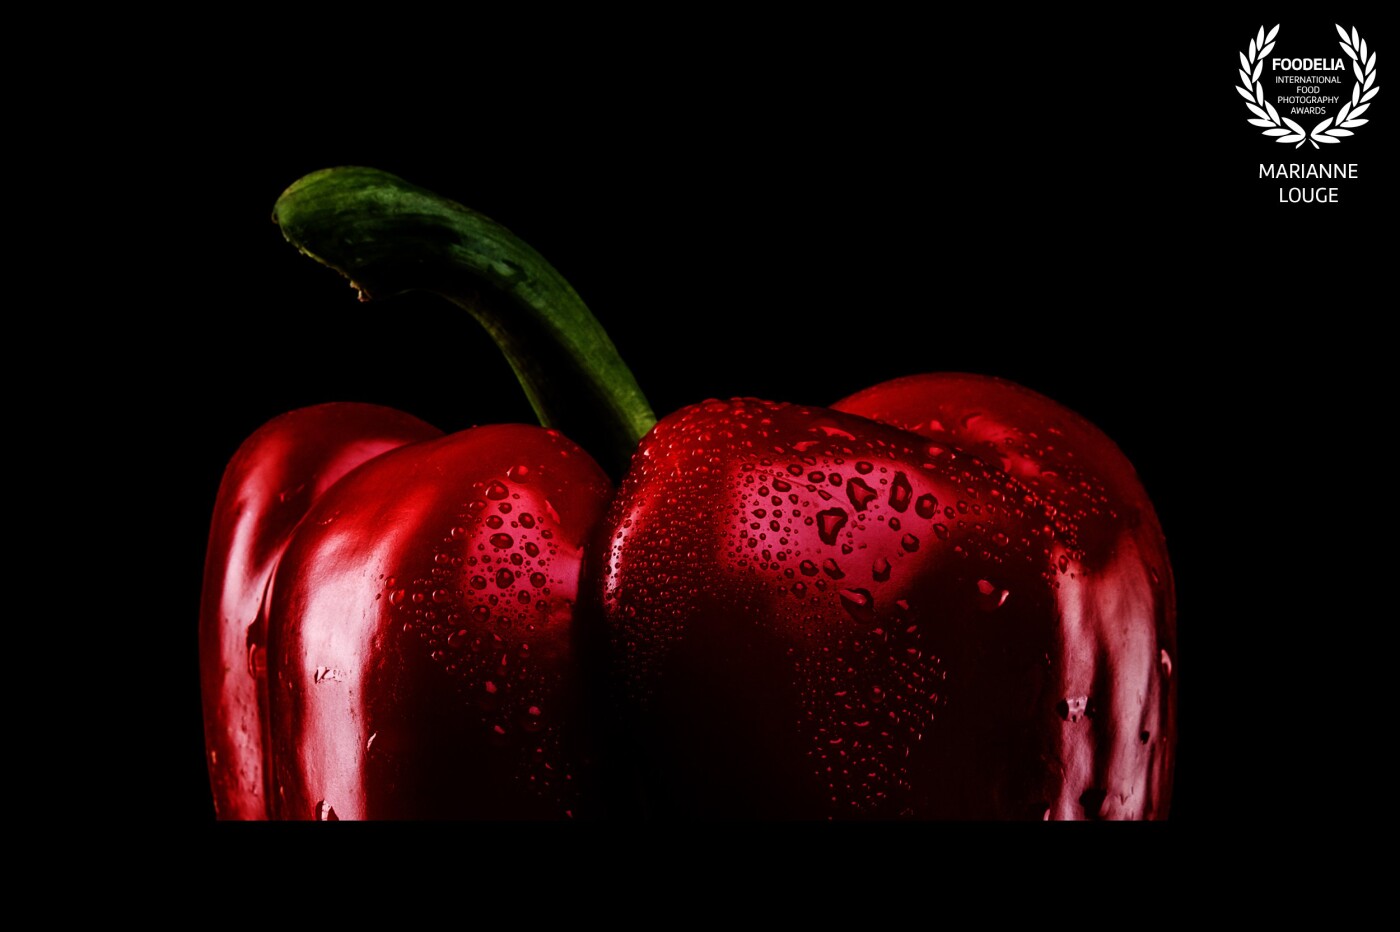 Making the ordinary beautiful...<br />
I wanted to create an image with a little freshness and simplicity to create an artistic pic of a red bell pepper.